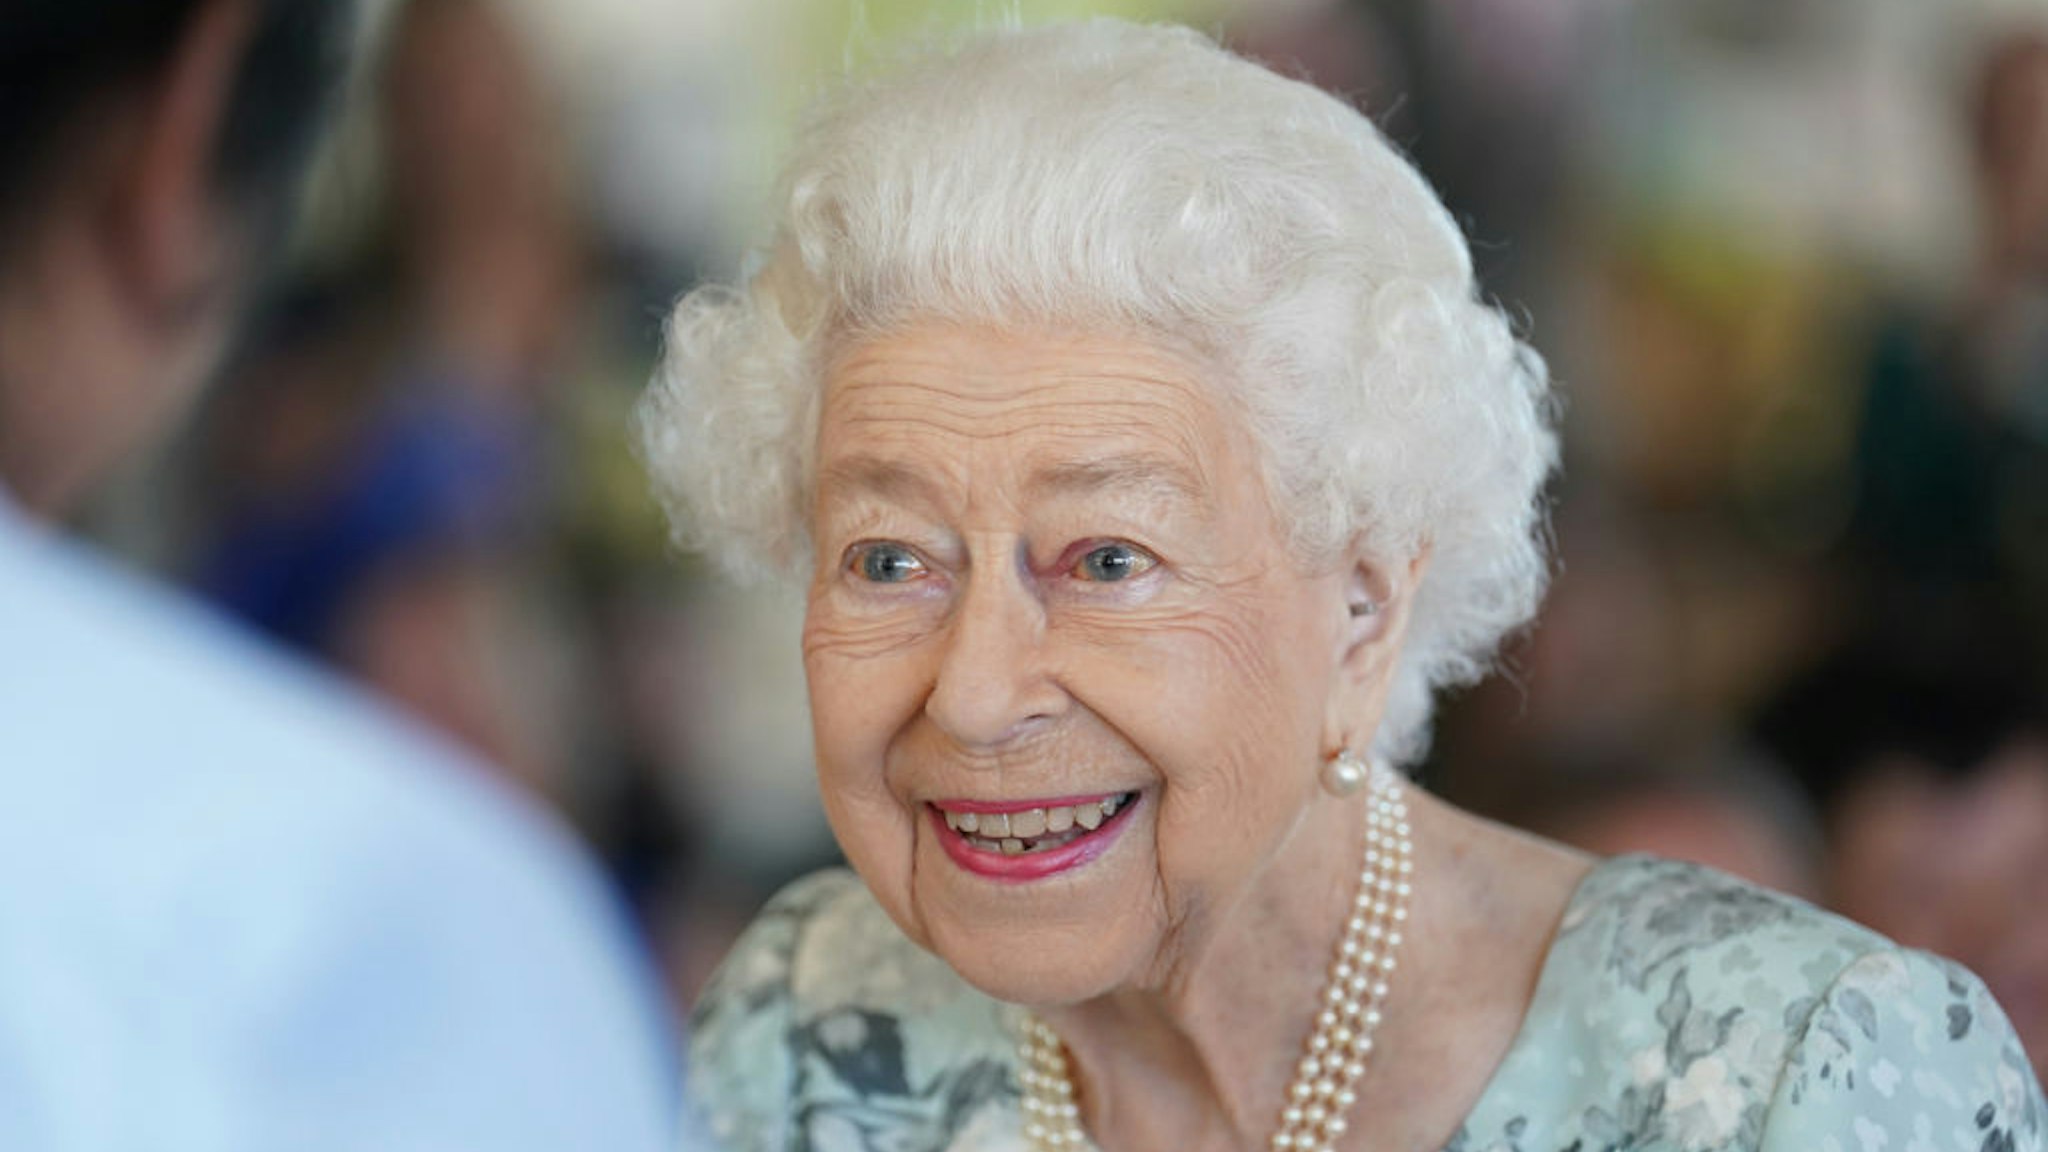 MAIDENHEAD, ENGLAND - JULY 15: Queen Elizabeth II smiles during a visit to officially open the new building at Thames Hospice on July 15, 2022 in Maidenhead, England. (Photo by Kirsty O'Connor-WPA Pool/Getty Images)